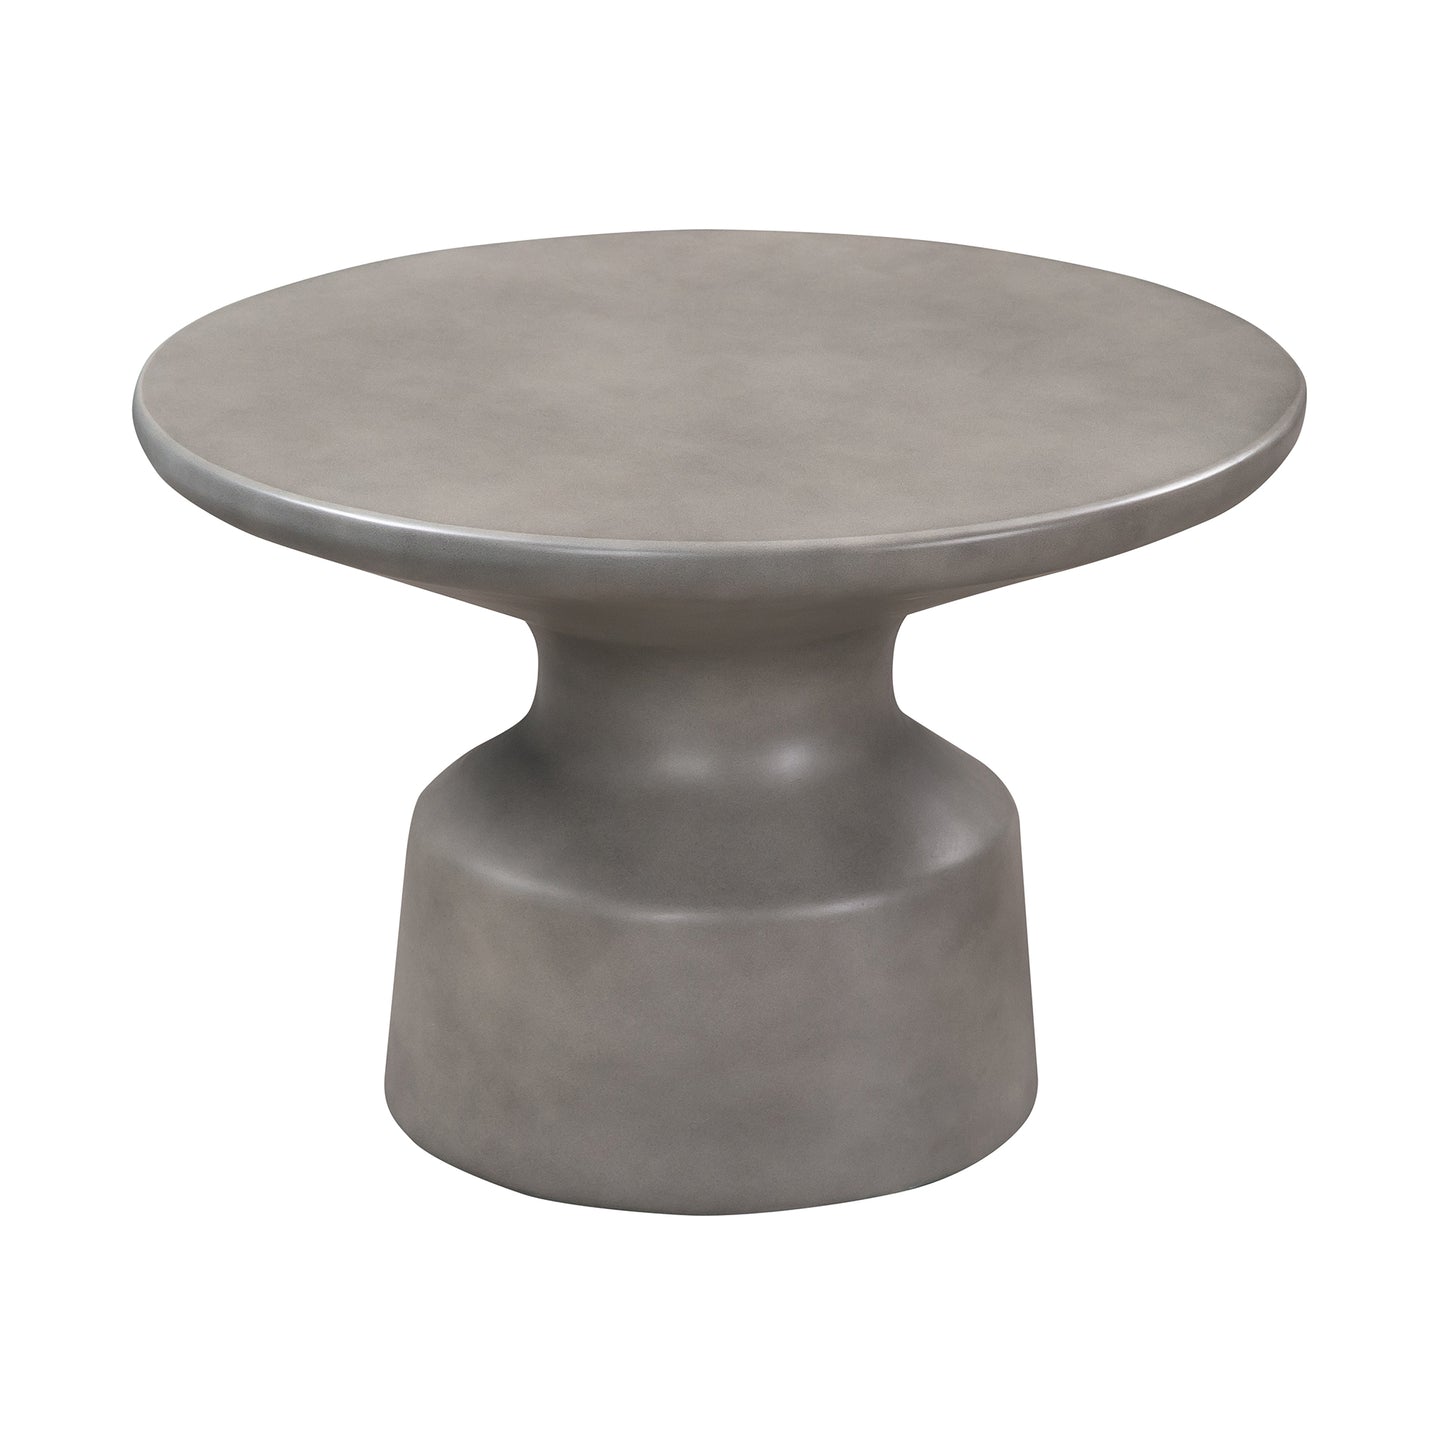 Sephie Round Pedestal Coffee Table in Gray Concrete